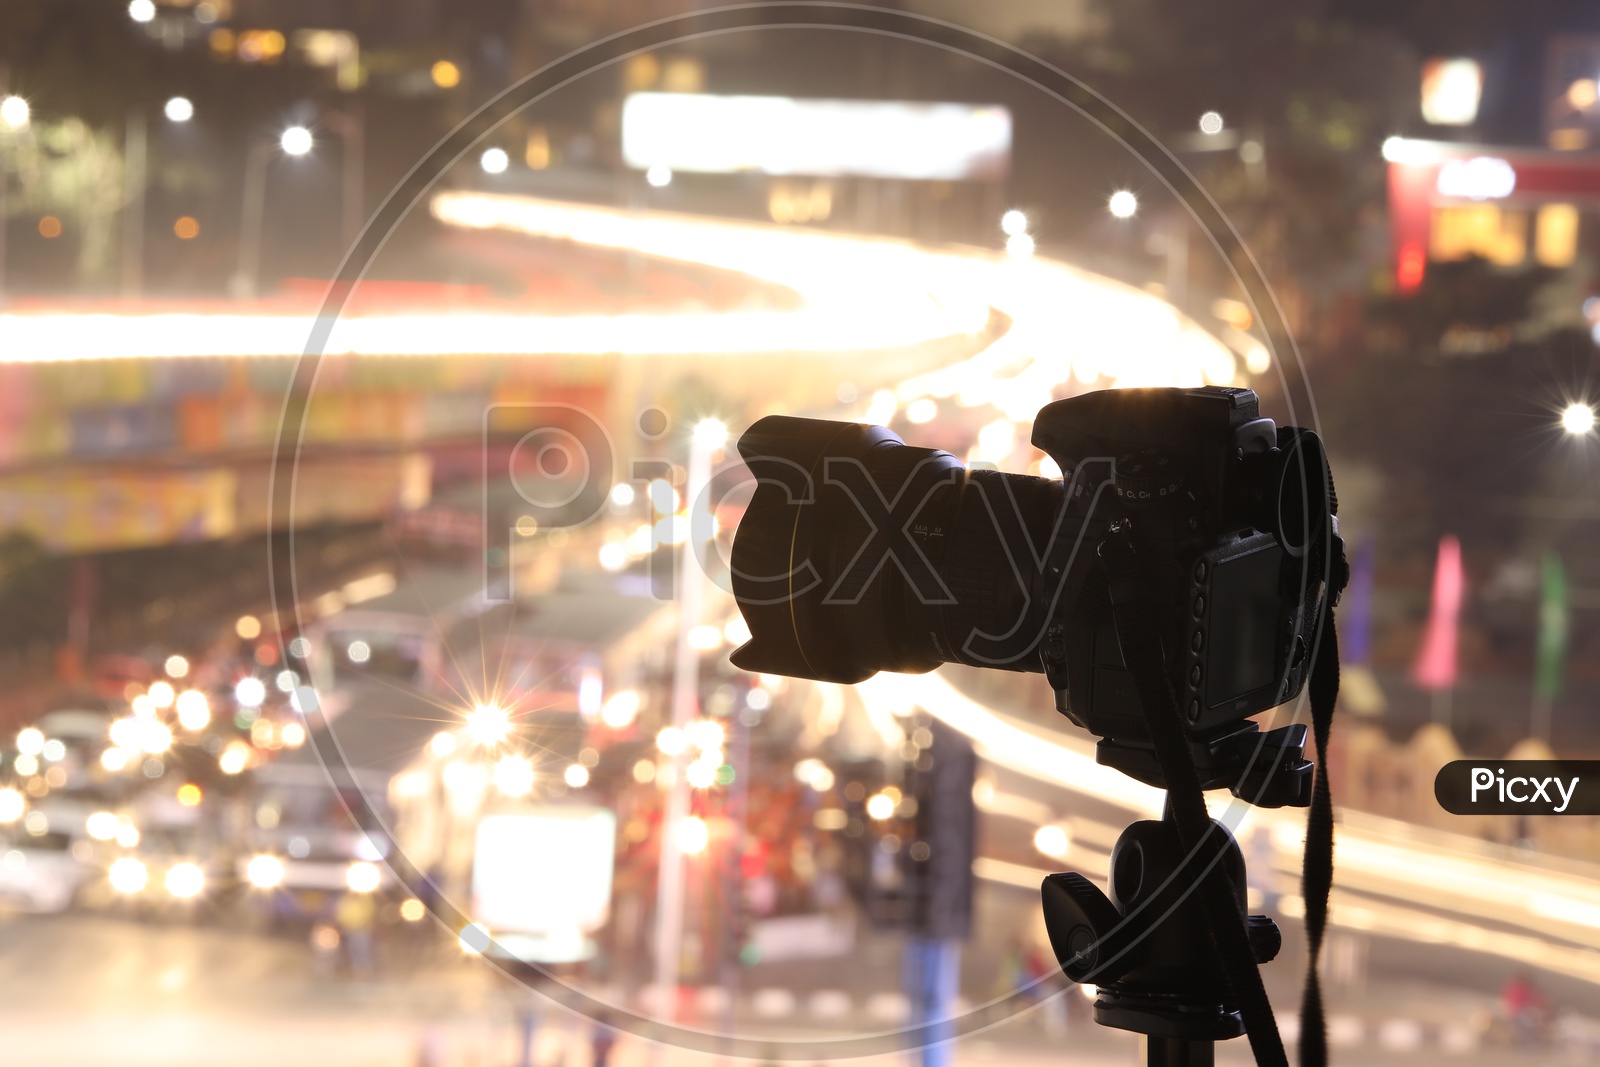 Silhouette of a DSLR Camera Mounted To a Tripod With Aerial View Of Traffic Vehicle Lights Bokeh Background